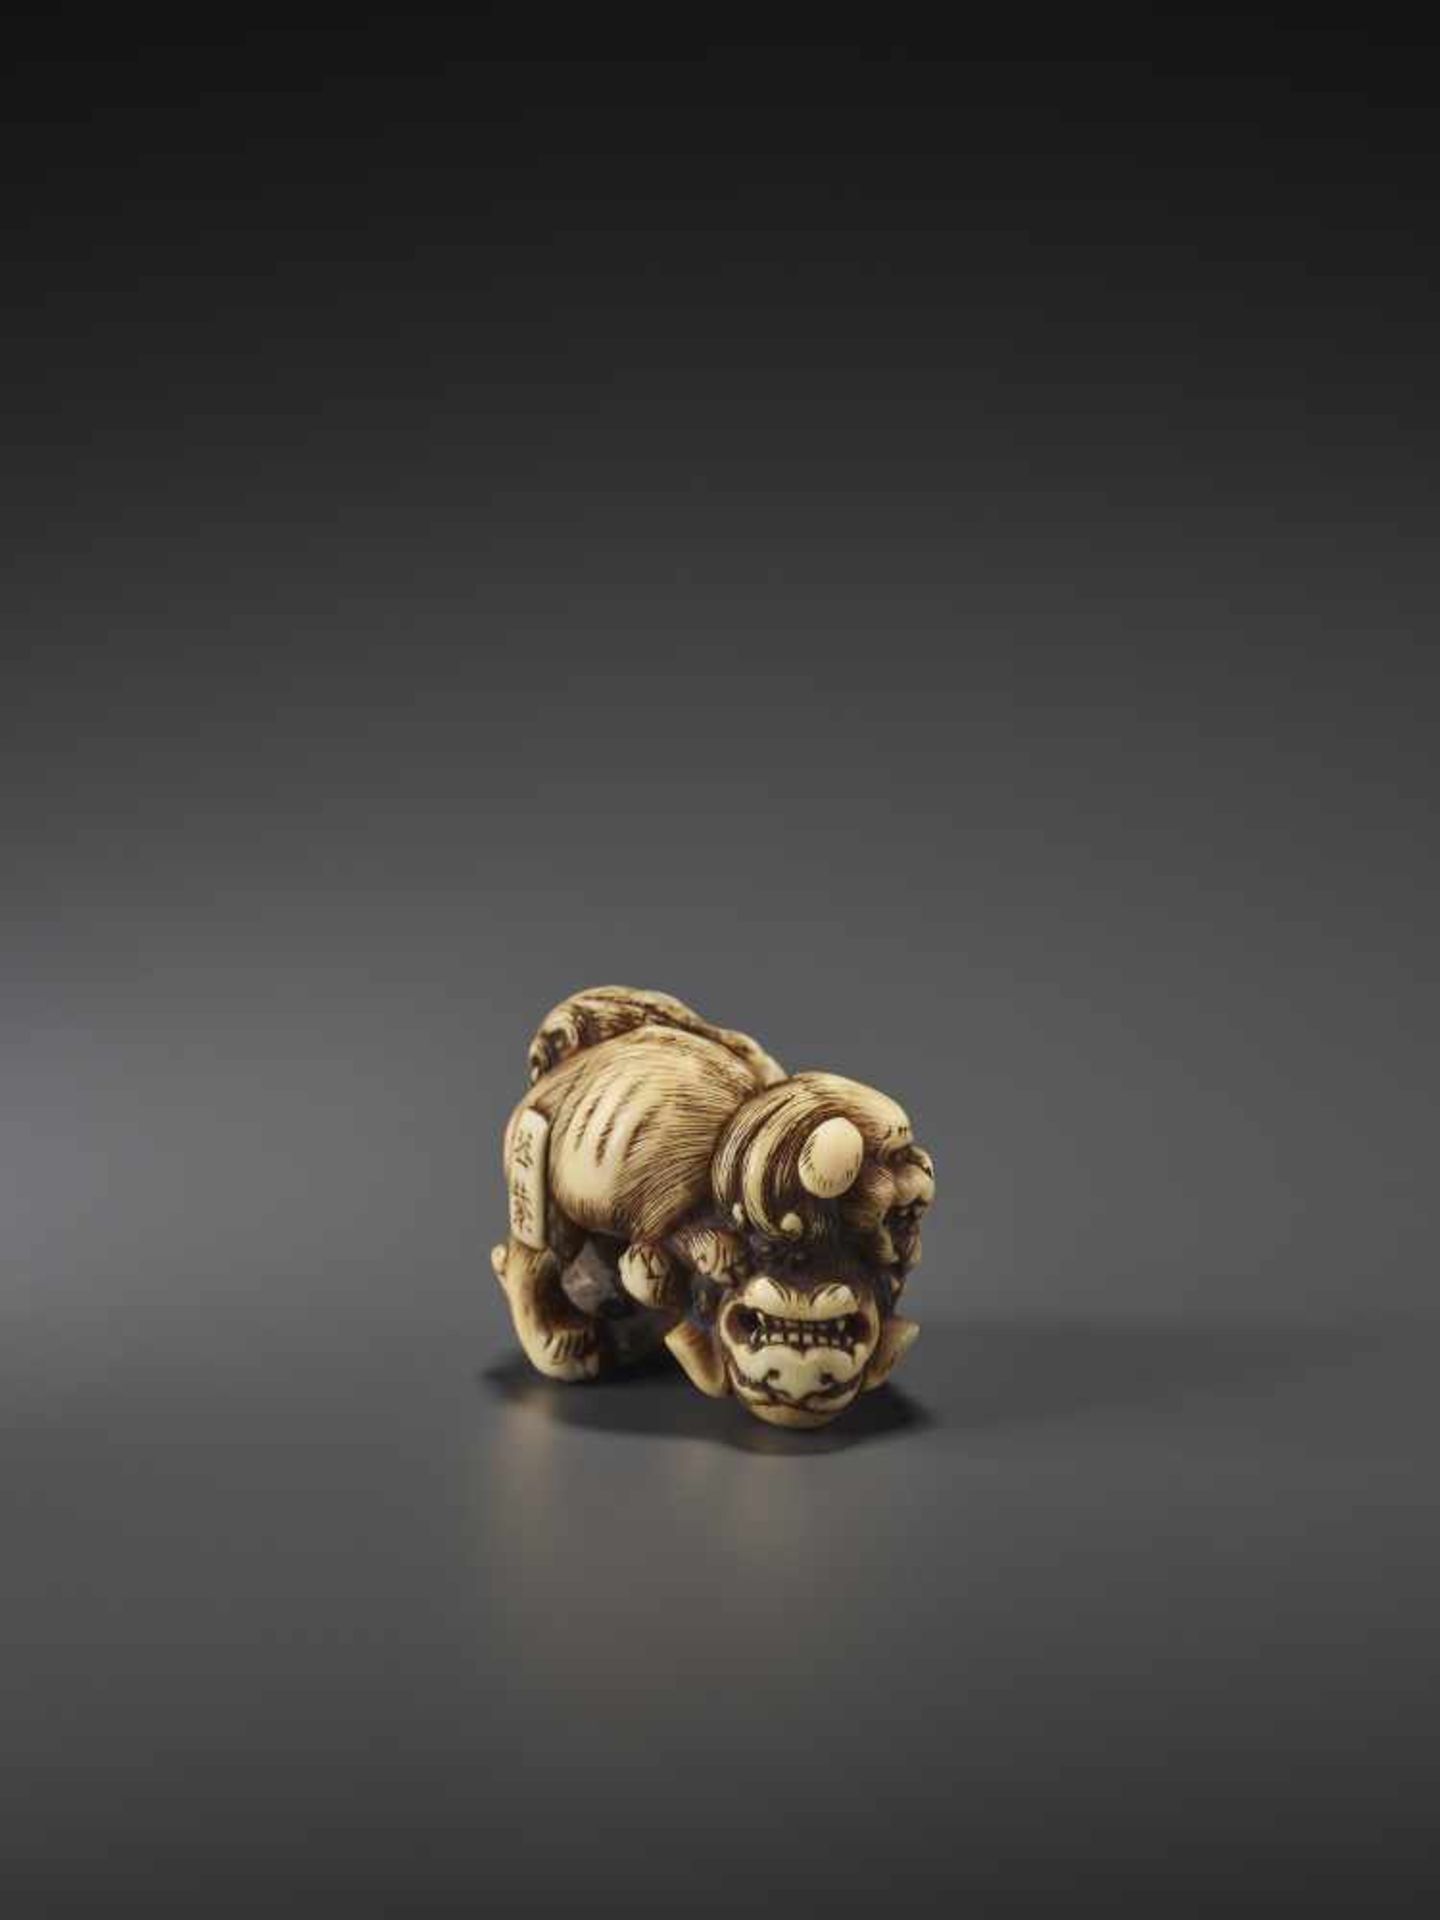 A FINE IVORY NETSUKE OF TWO FIGHTING SHISHI BY KINSHI By Kinshi, ivory netsukeJapan, 19th century, - Image 7 of 10